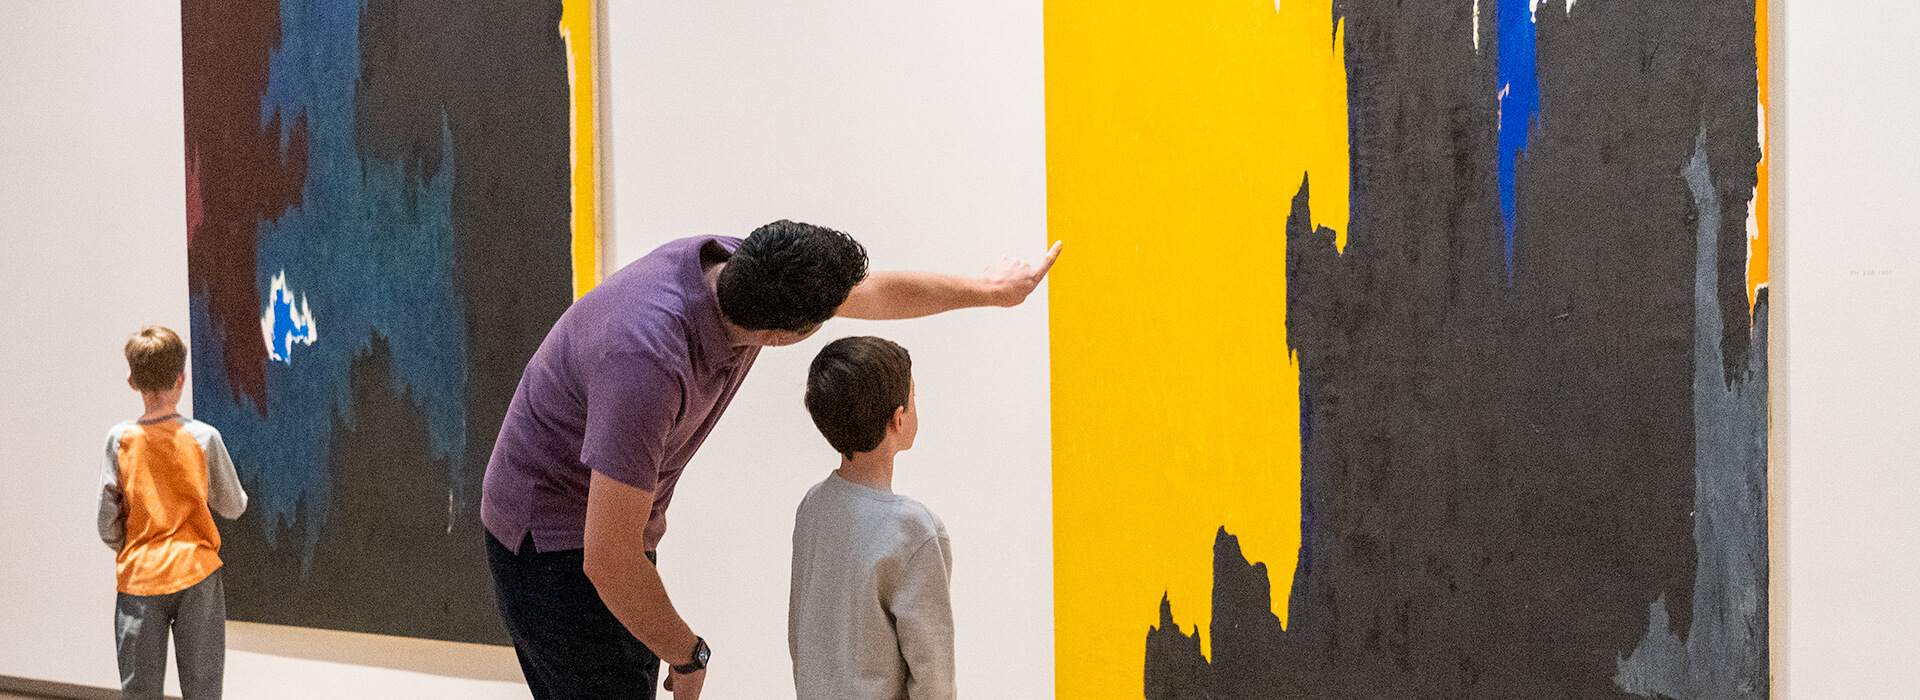 A father points at a painting with his two young sons next to him